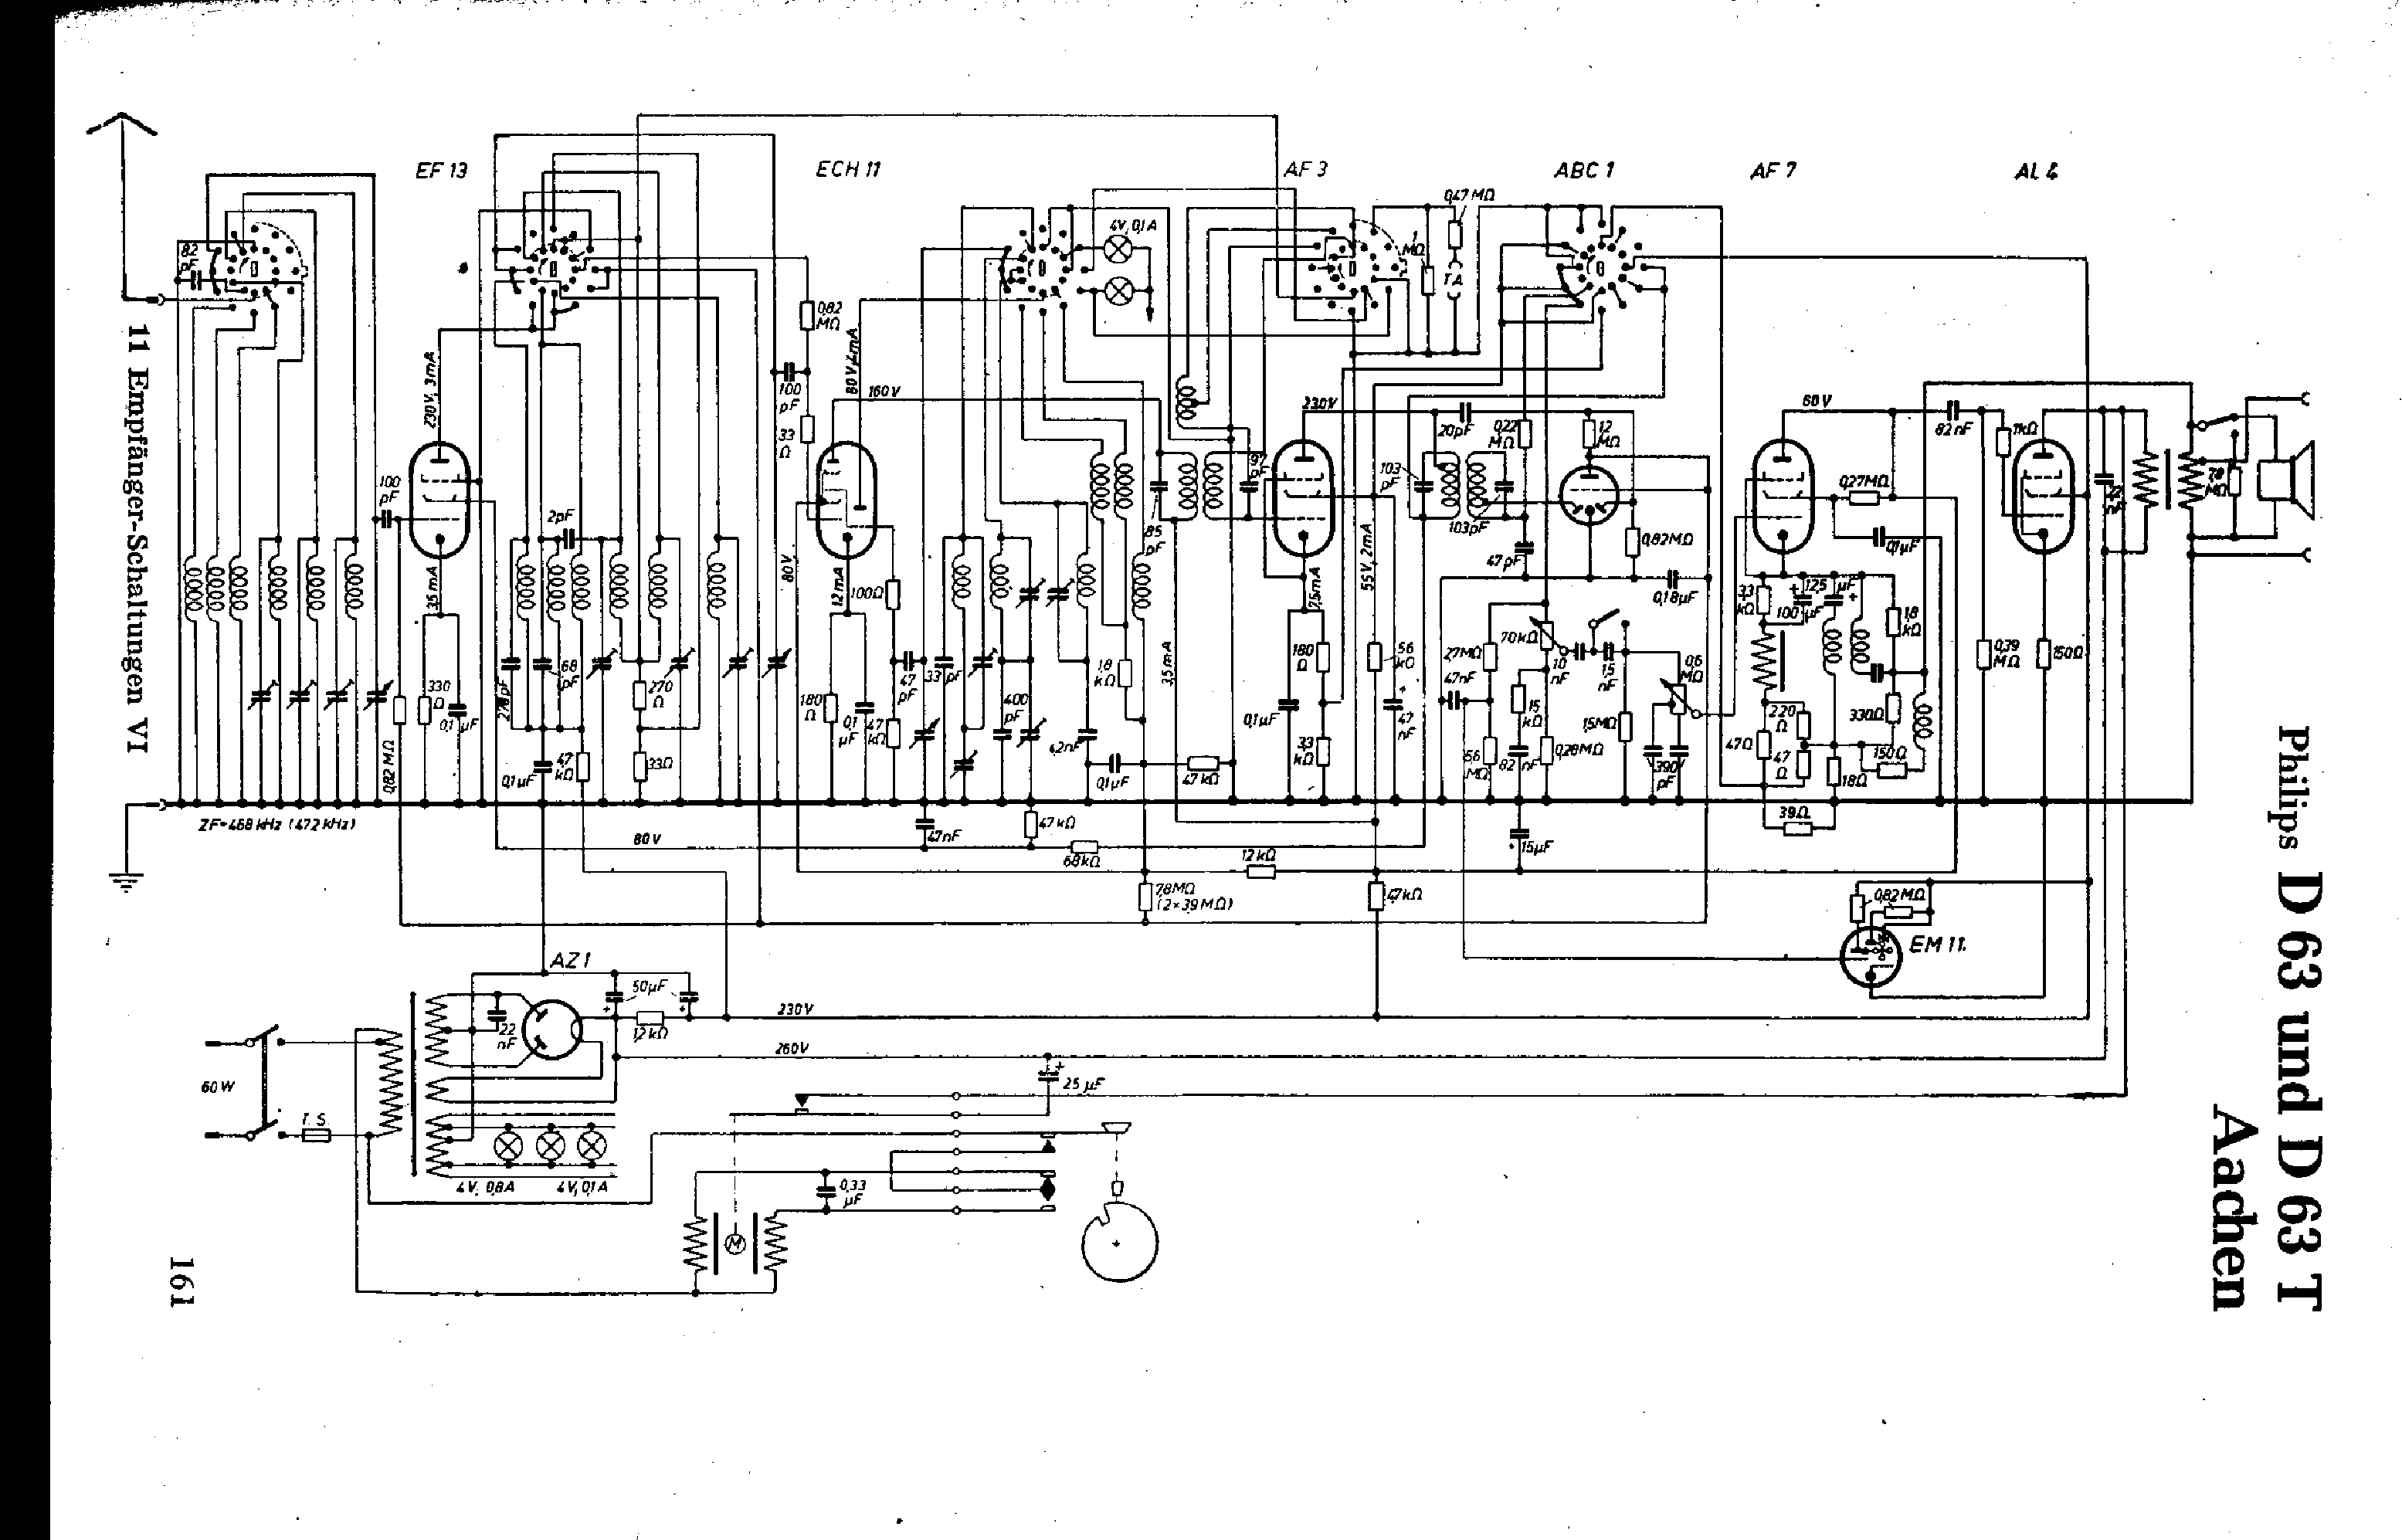 PHILIPS D63 service manual (1st page)